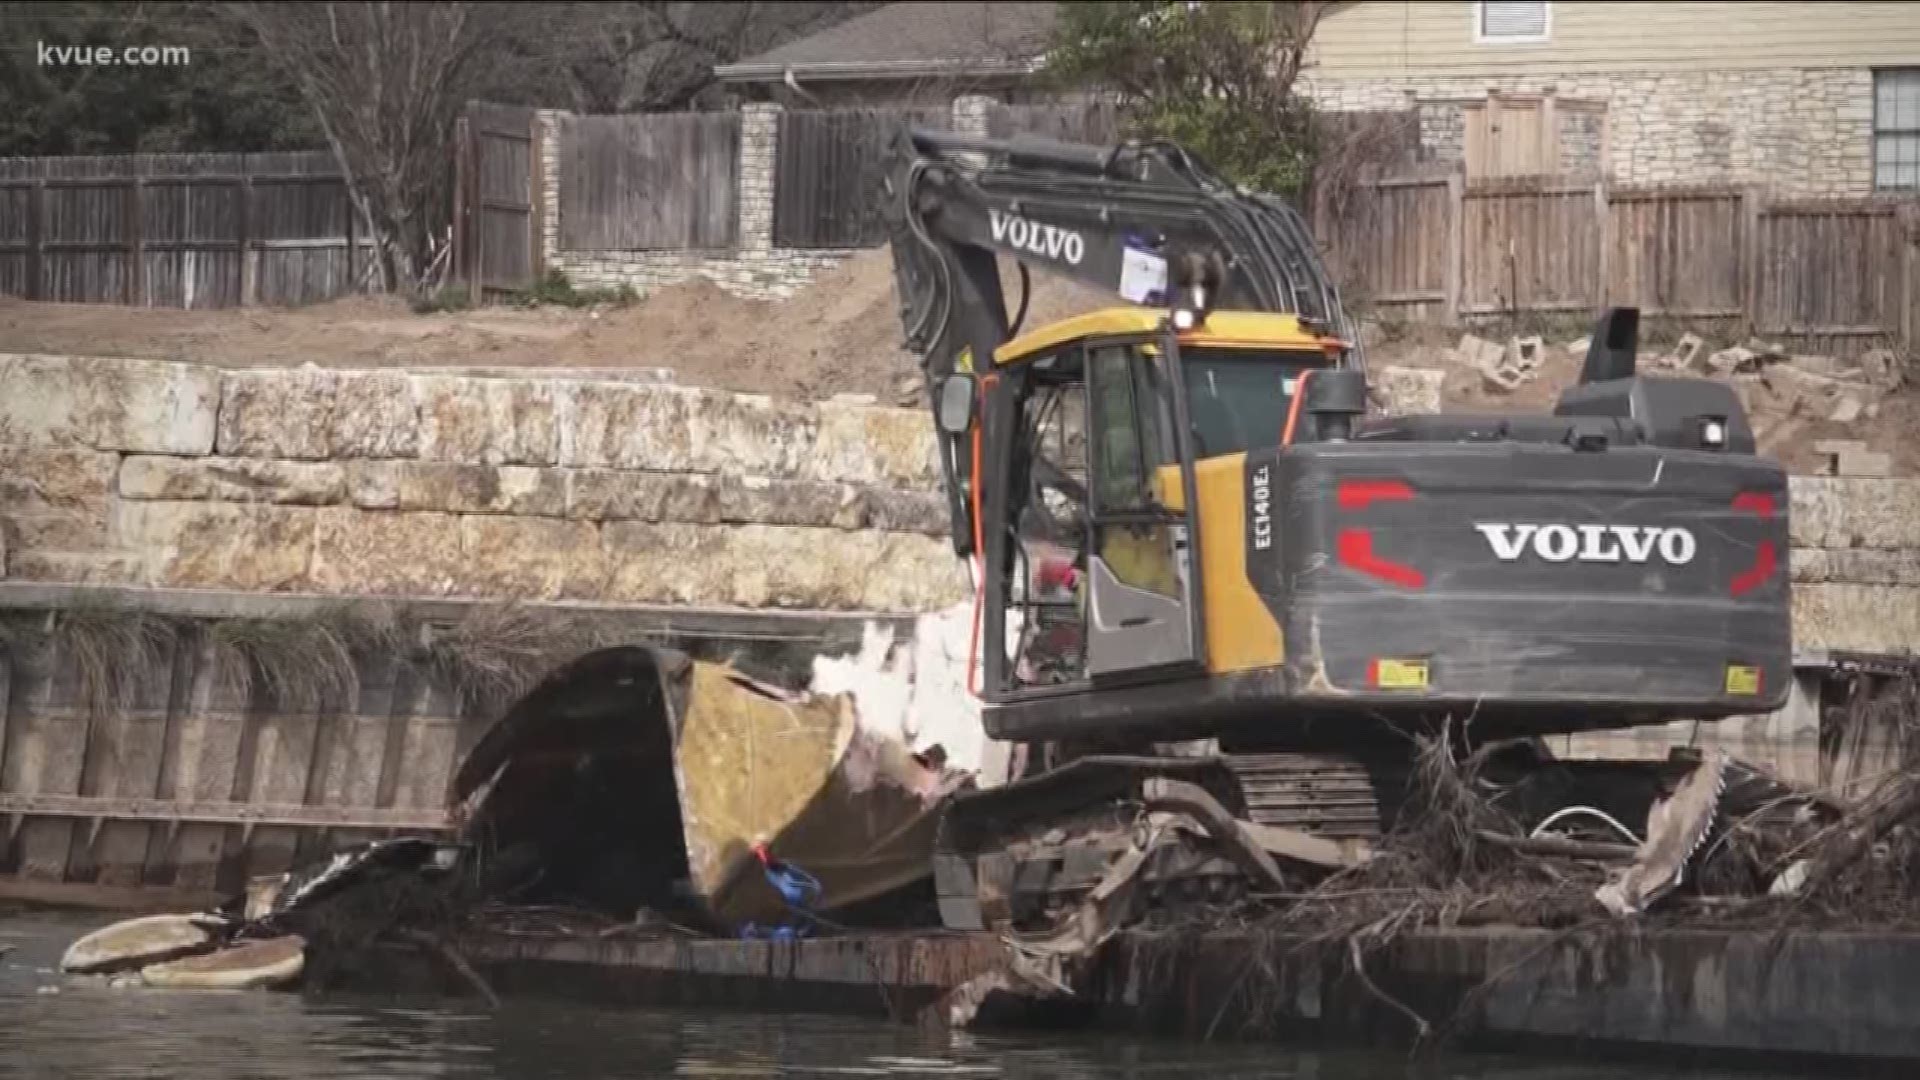 The community along Lake LBJ is taking matters into their own hands. More than a dozen people came together to help clean out the debris inside the lake after catastrophic flooding last fall.